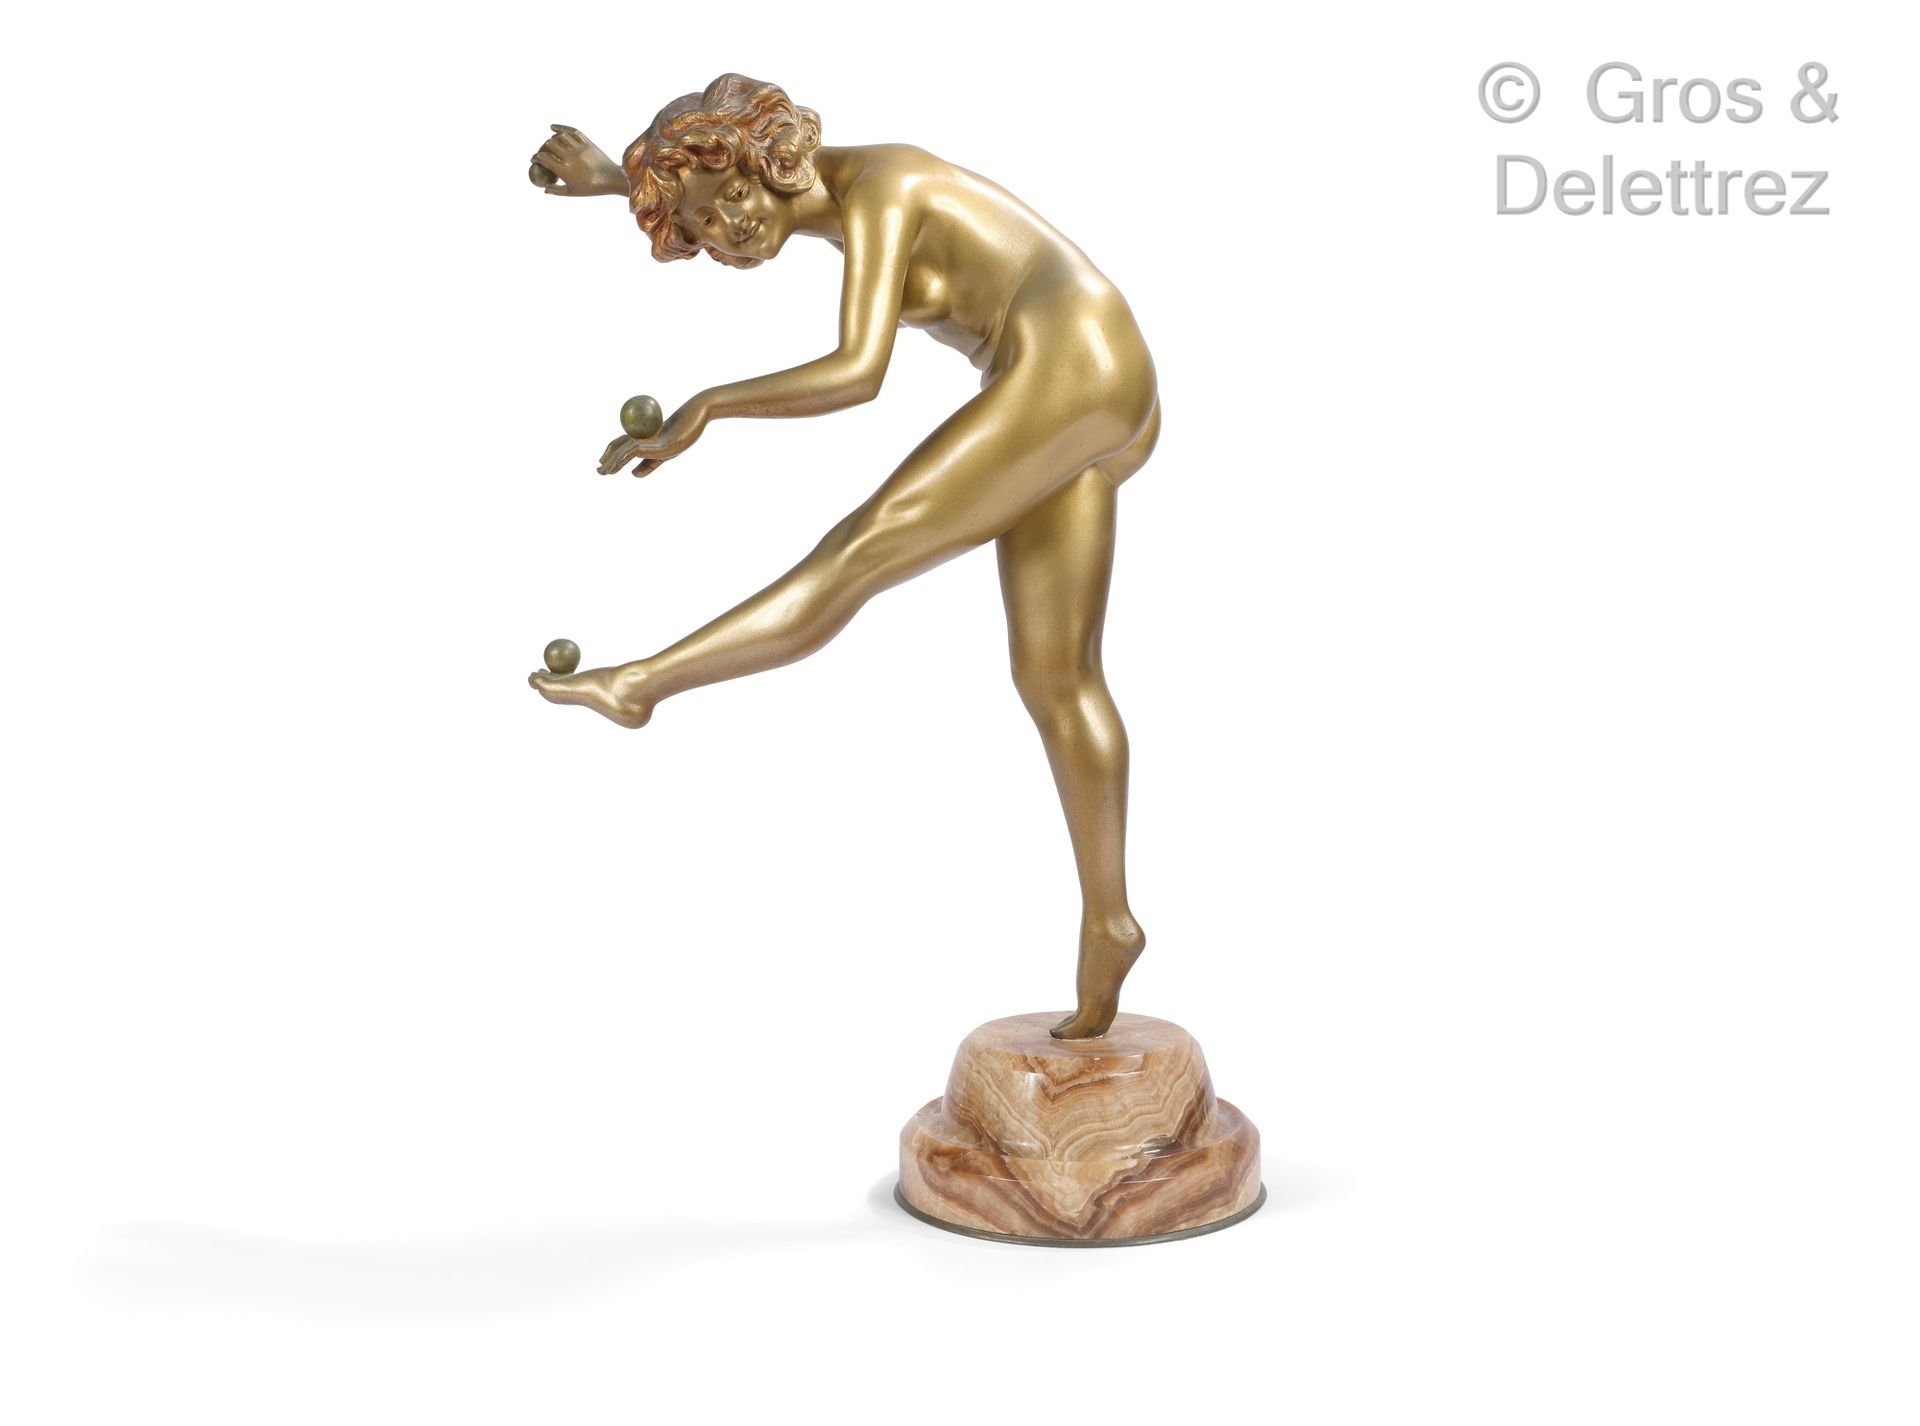 Claire Jeanne COLINET (1880-1950) Bowls player

Sculpture in bronze with golden &hellip;